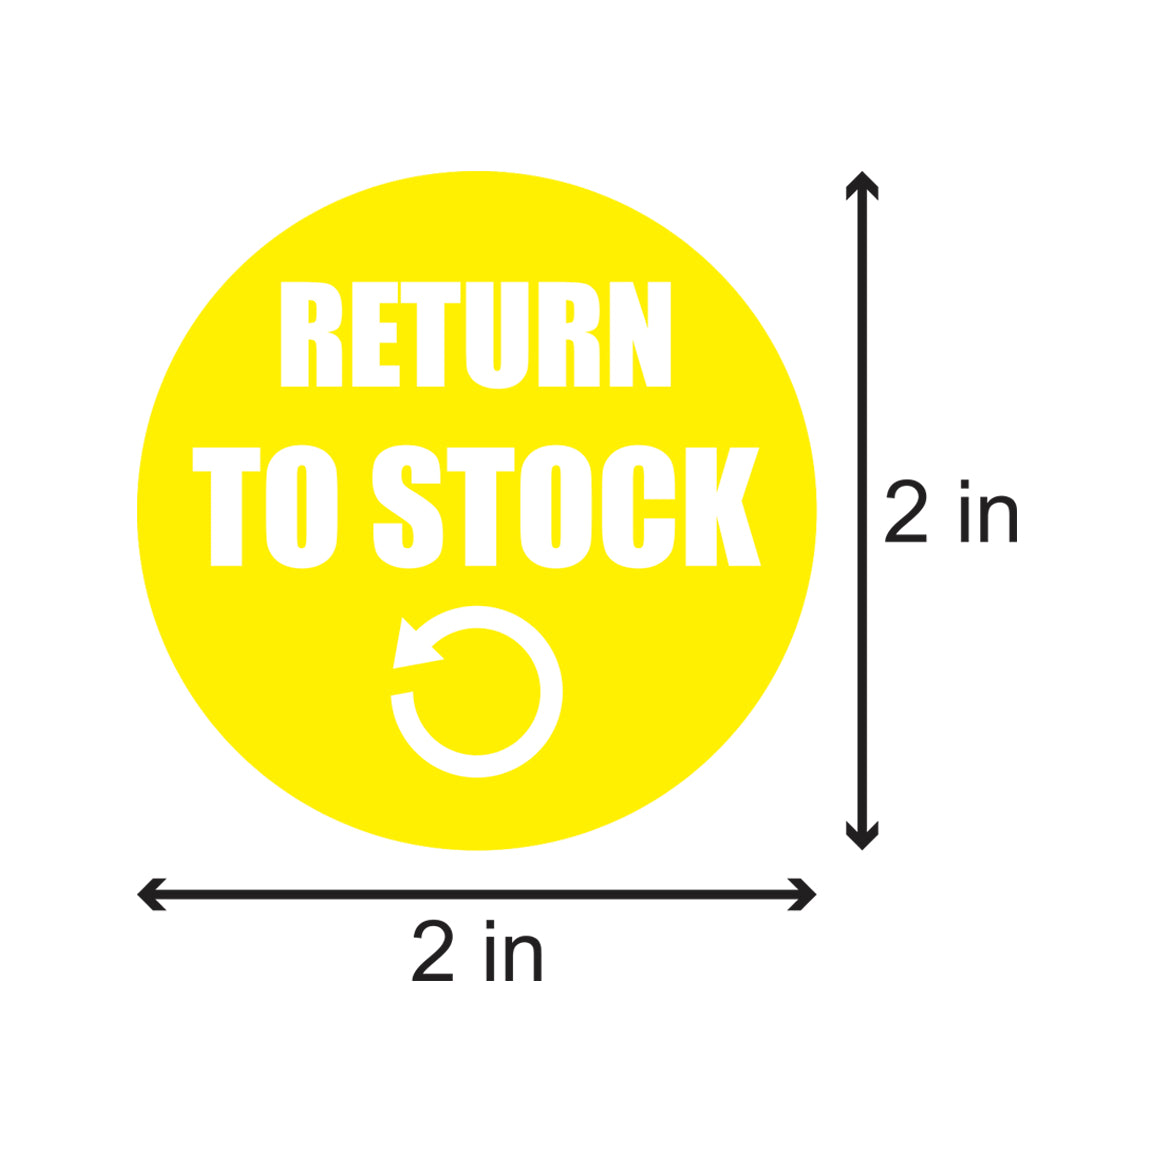 2 inch | Quality Control: Return to Stock Stickers